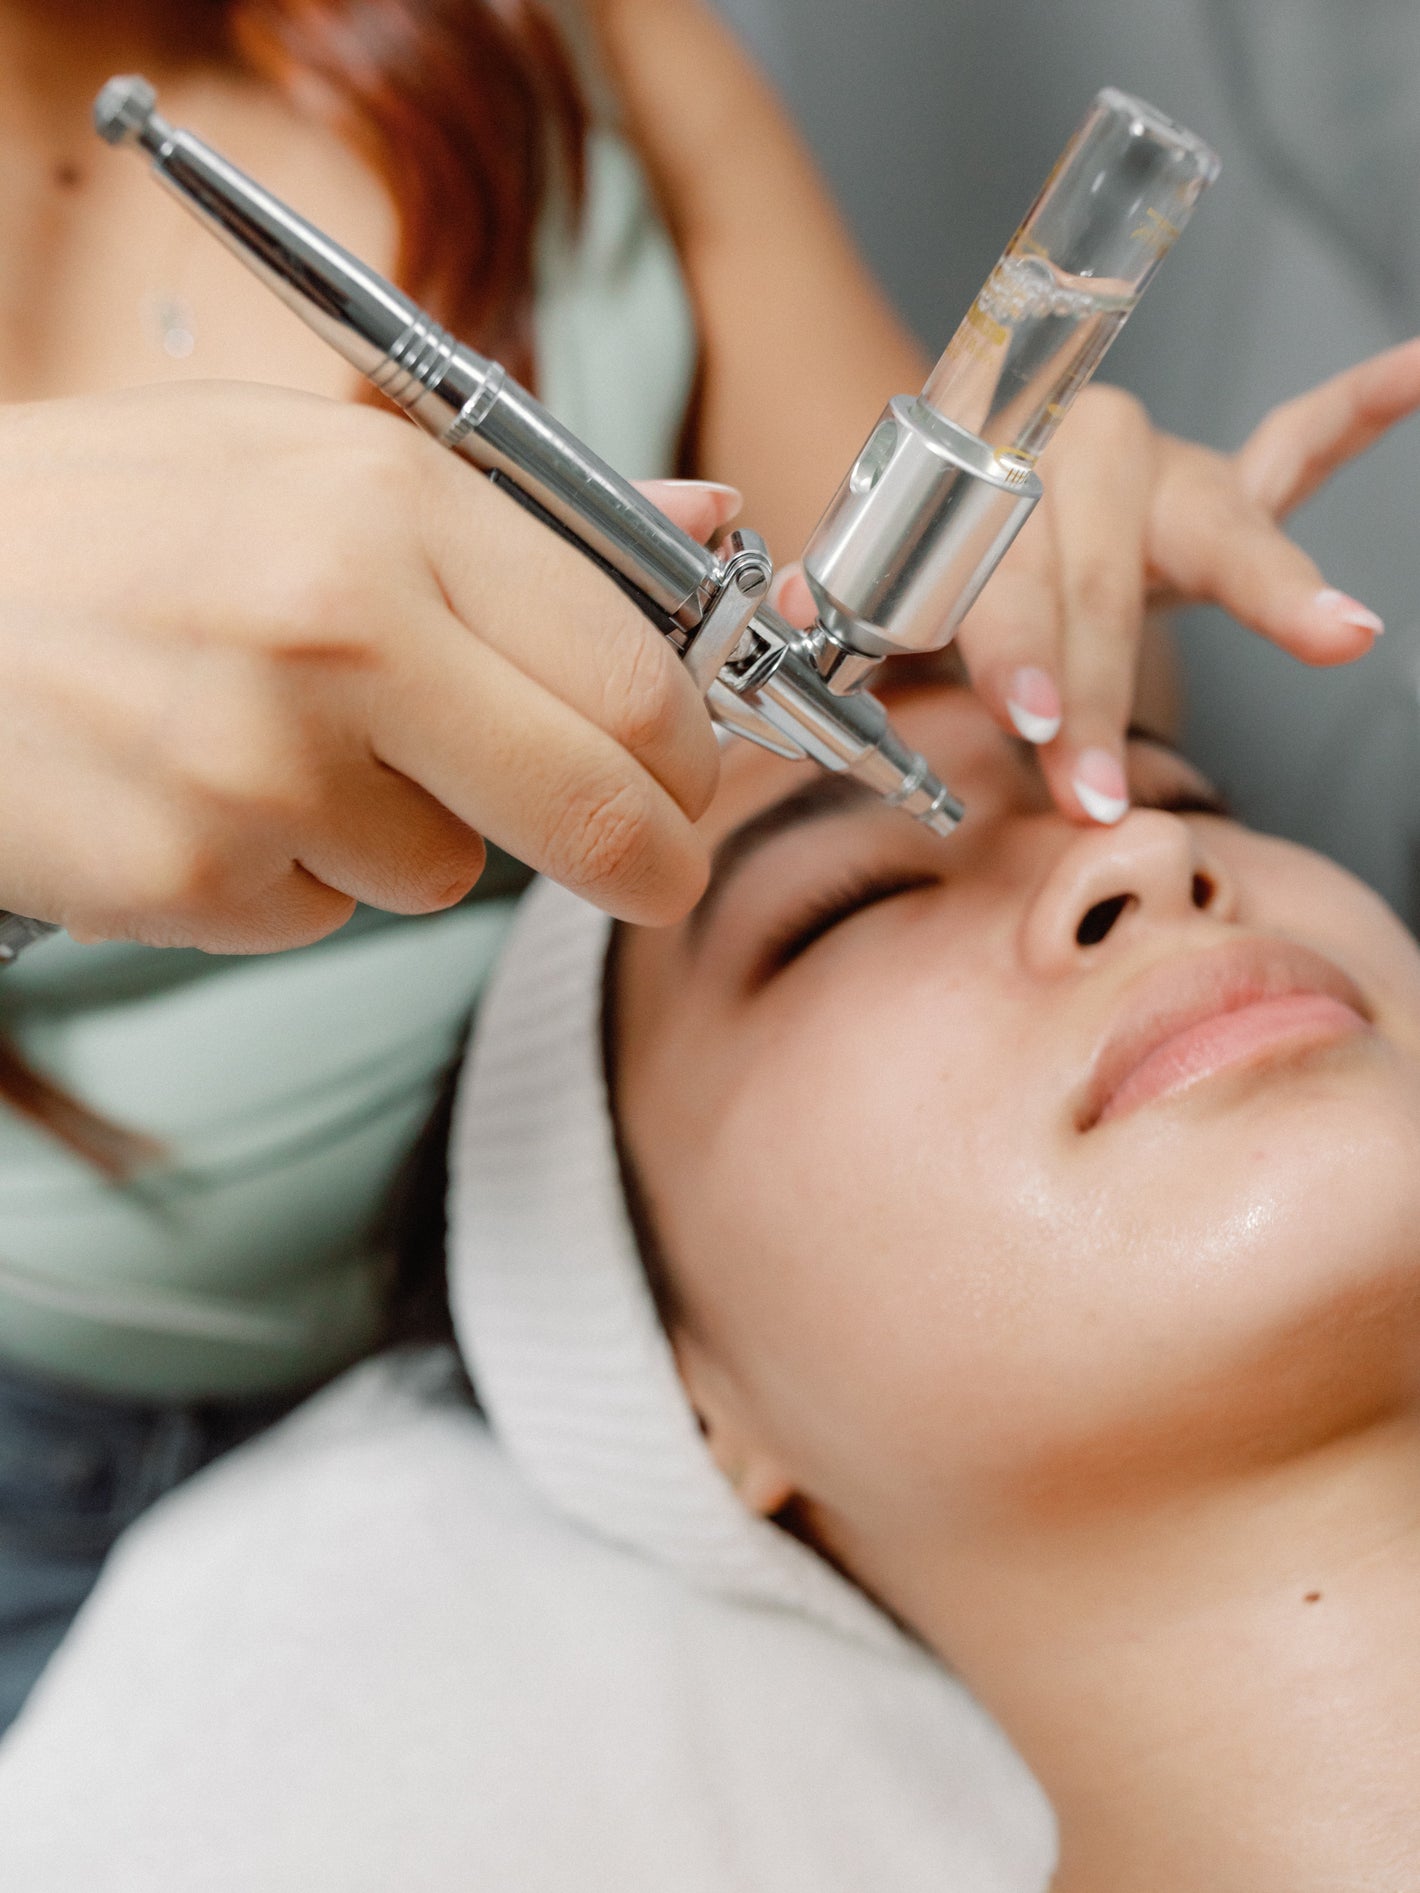 Link to view Skin Services And Image of Esthetician working with a client at Blush Bar in Stockton, CA